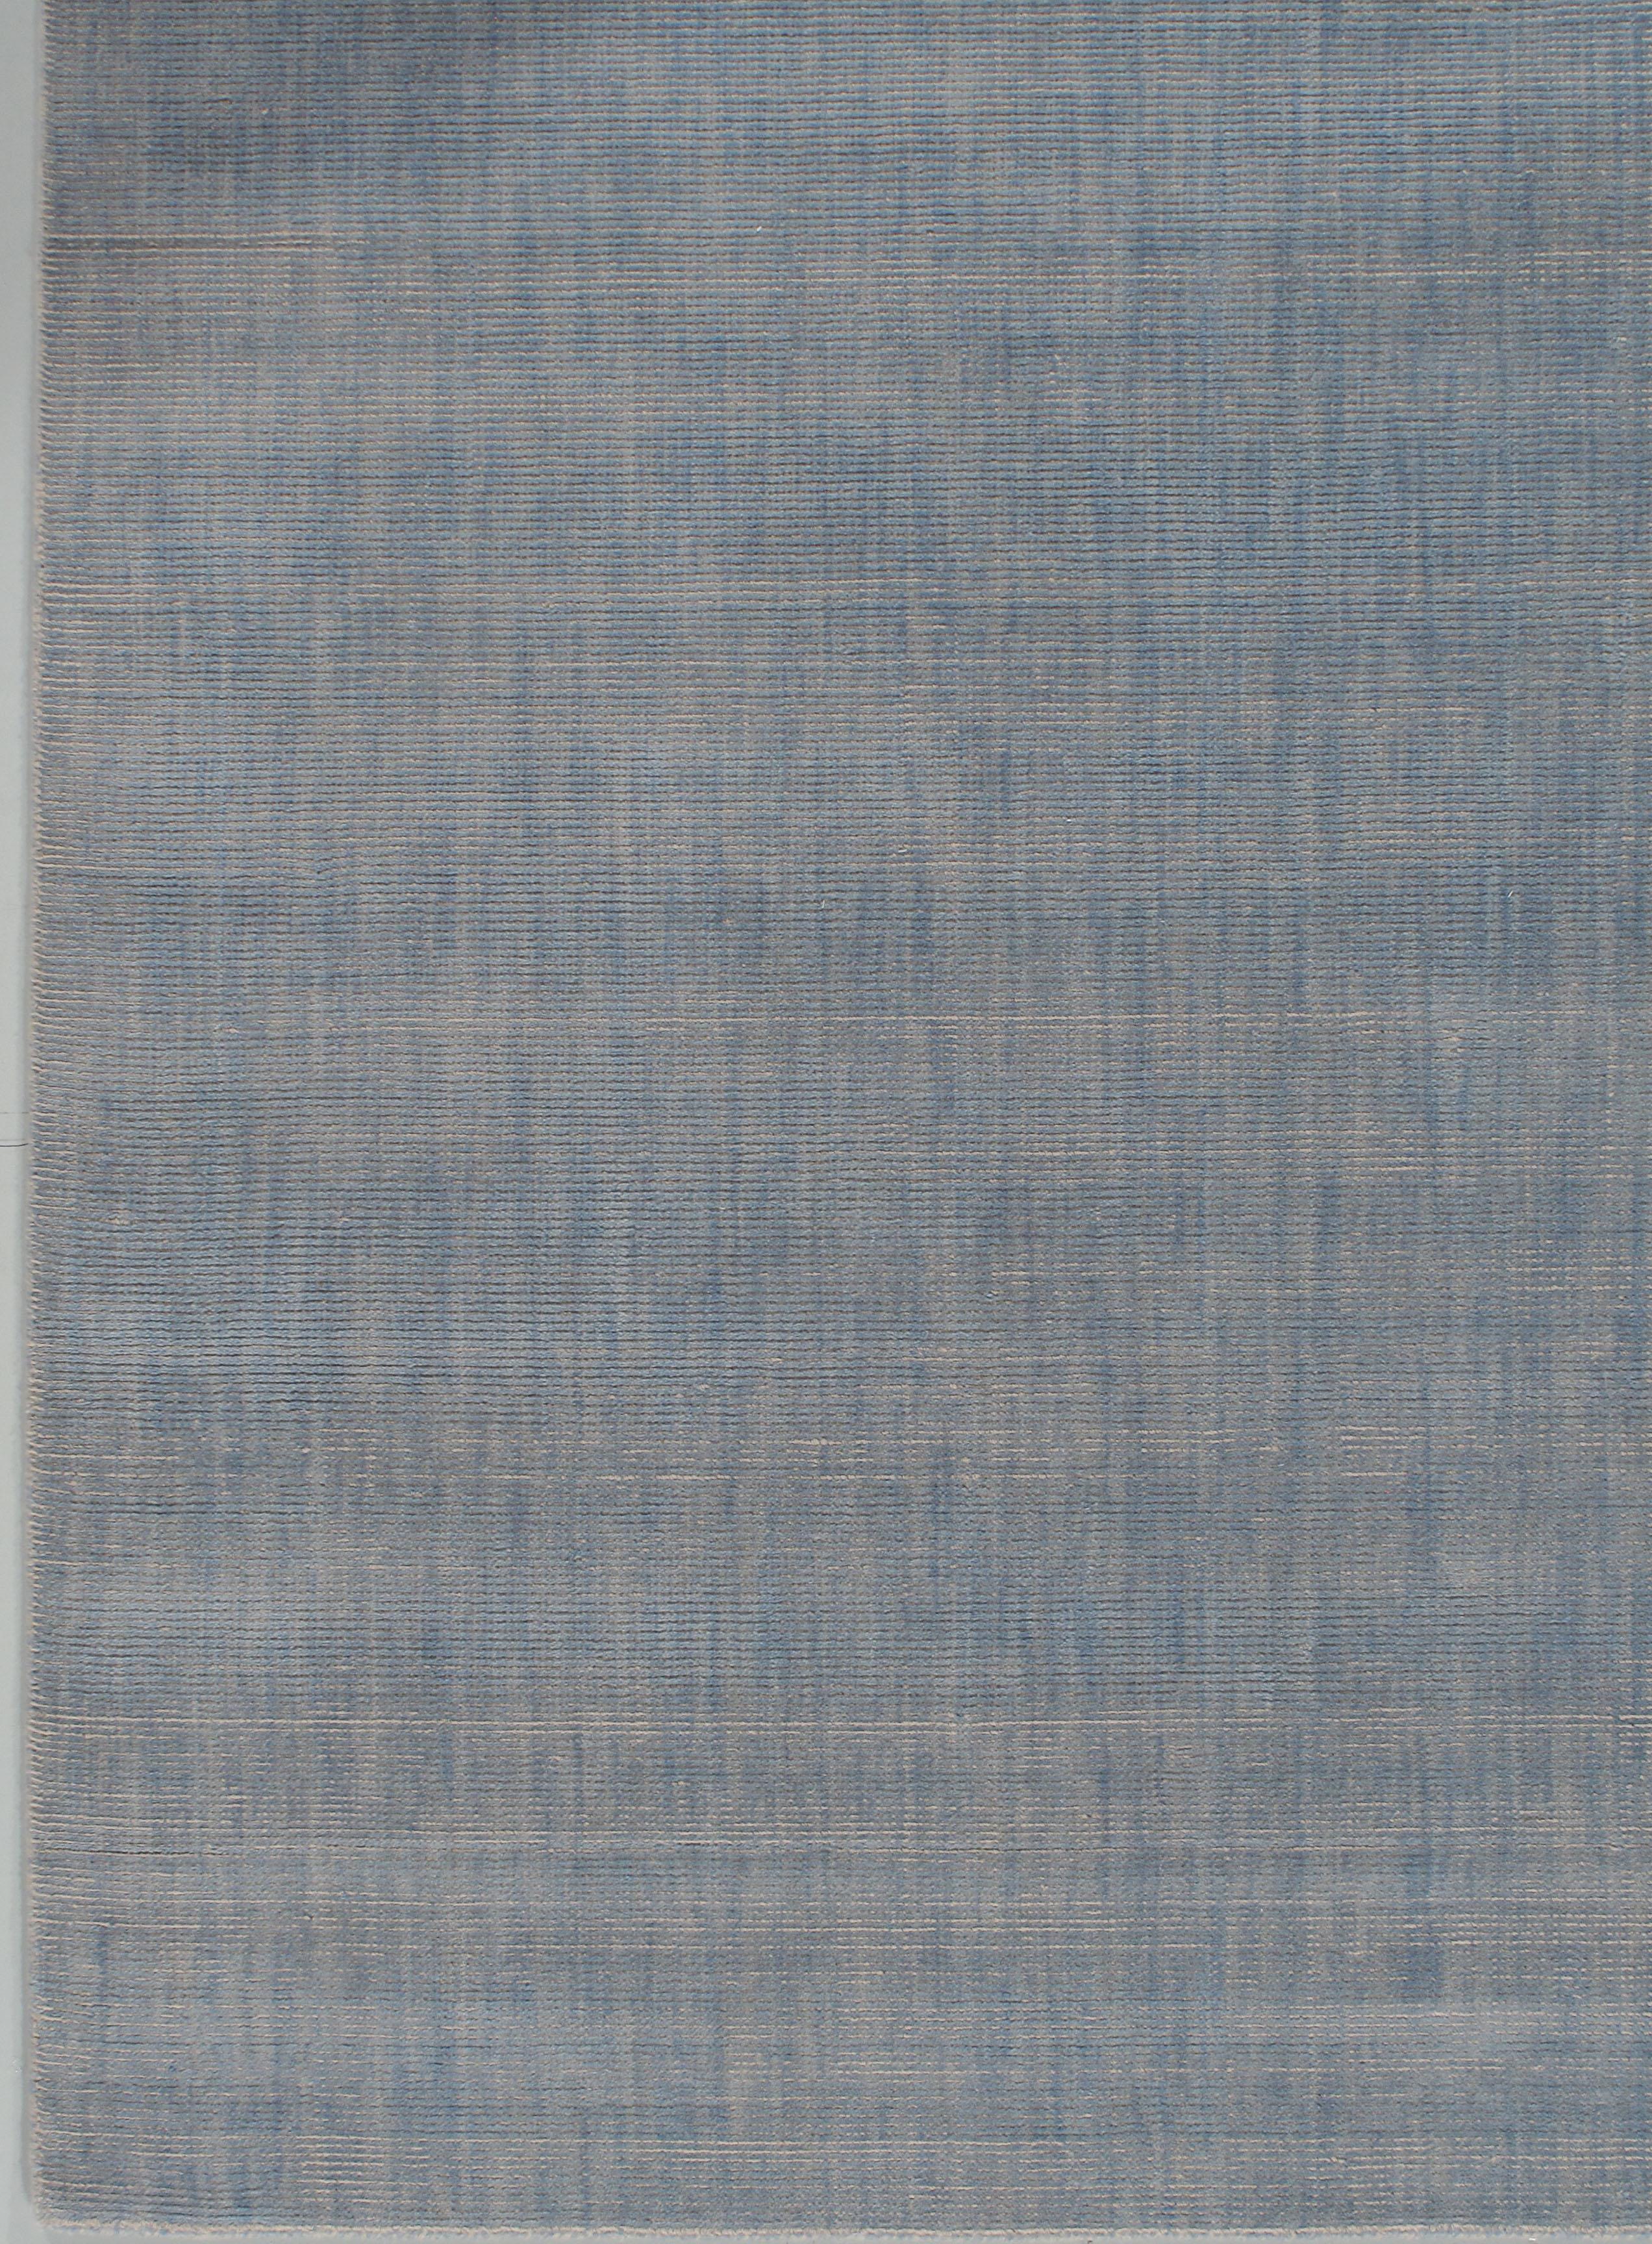 Wool Simplicity Polo Blue Contemporary Area Rug  8'x10' For Sale